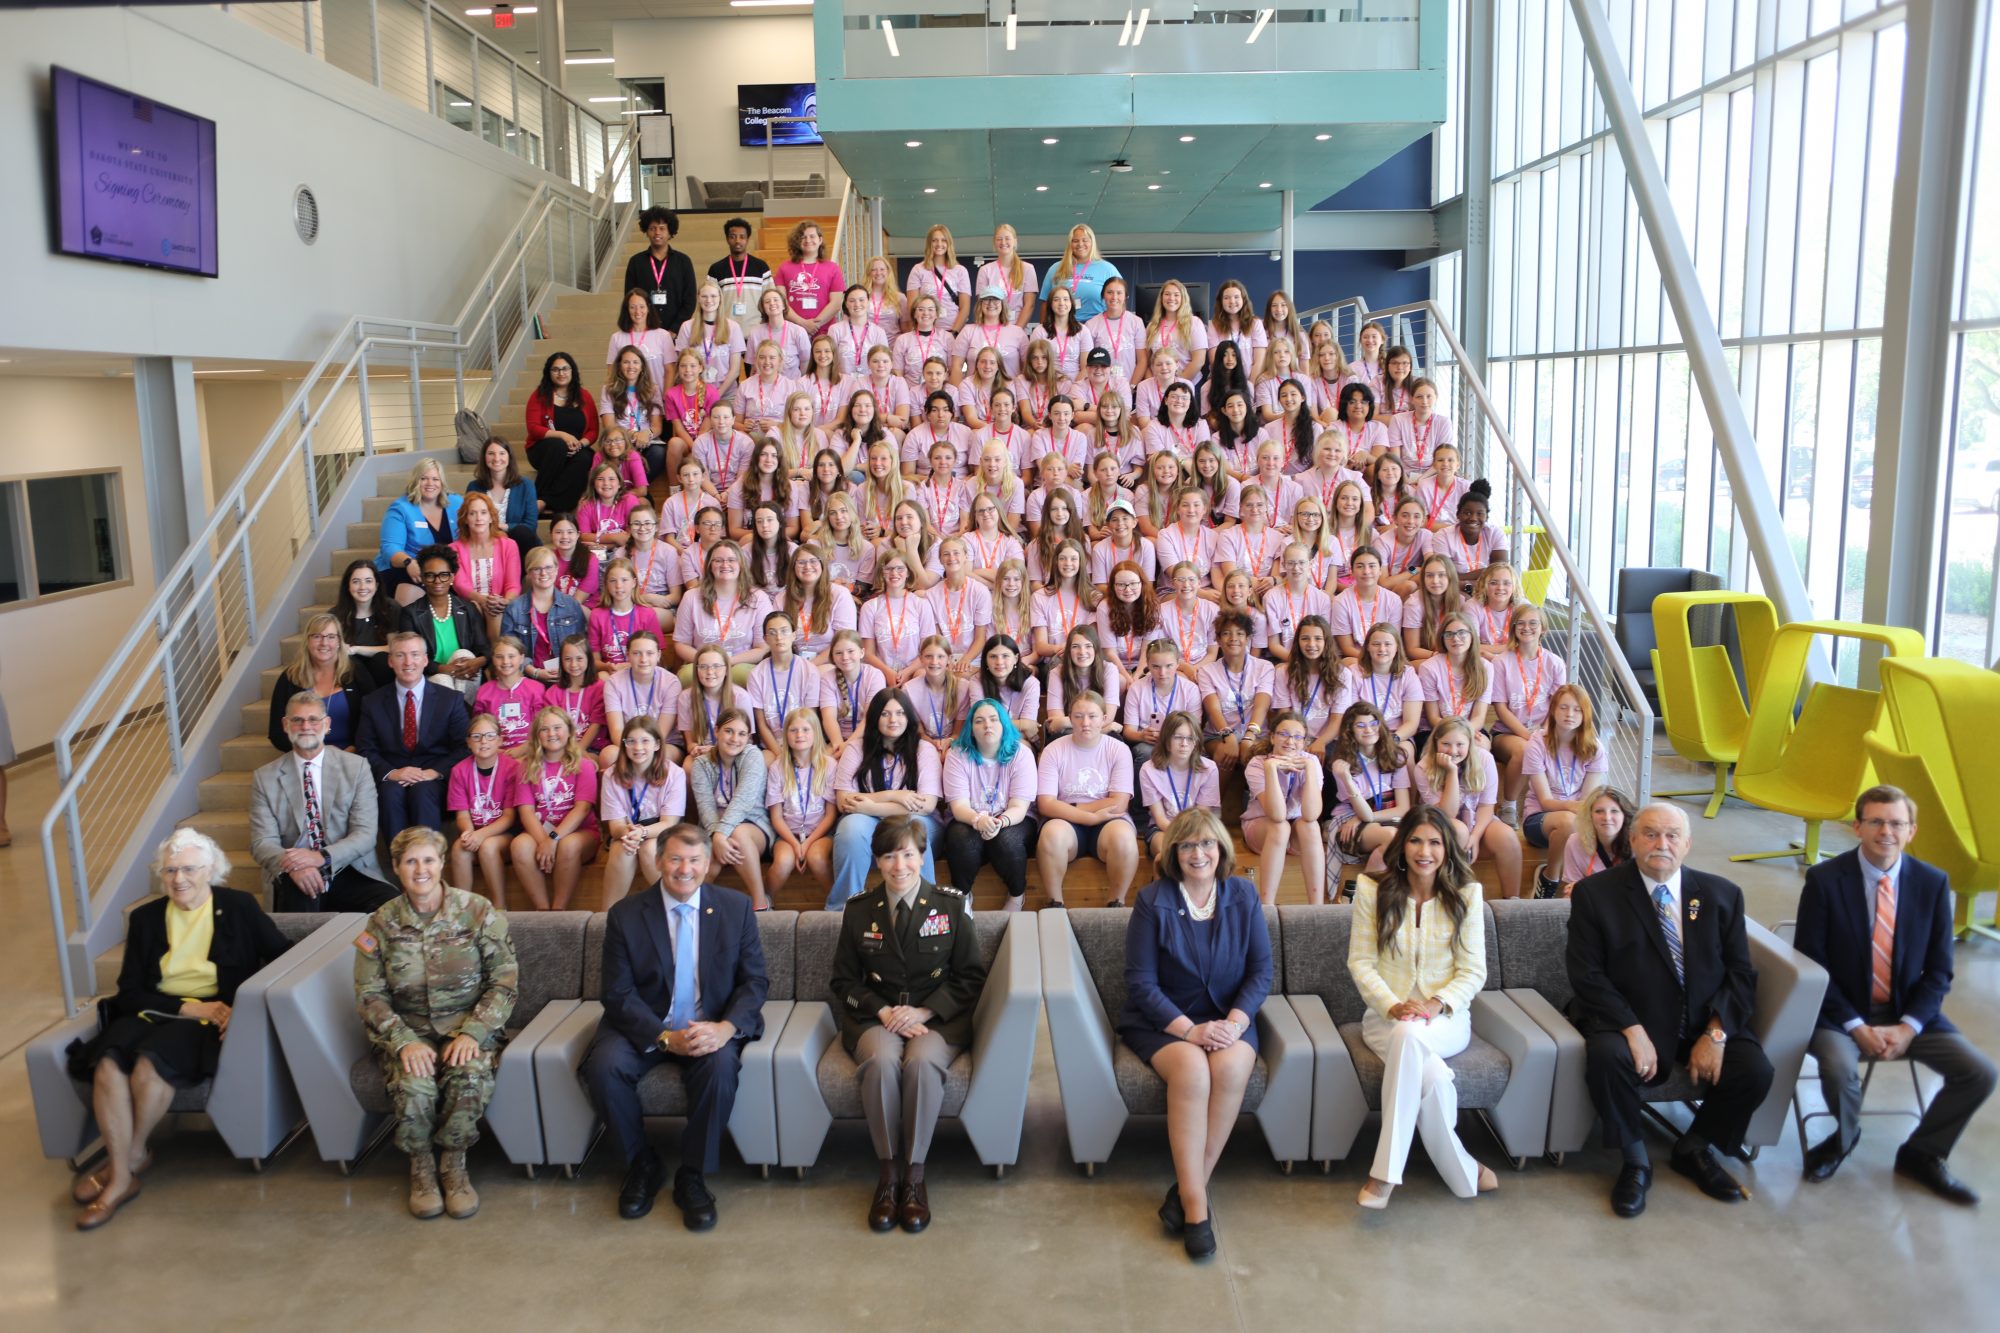 The 2023 Dakota State University CybHER camp participants pose for a group photo with Gov. Kristi Noem and other guests.